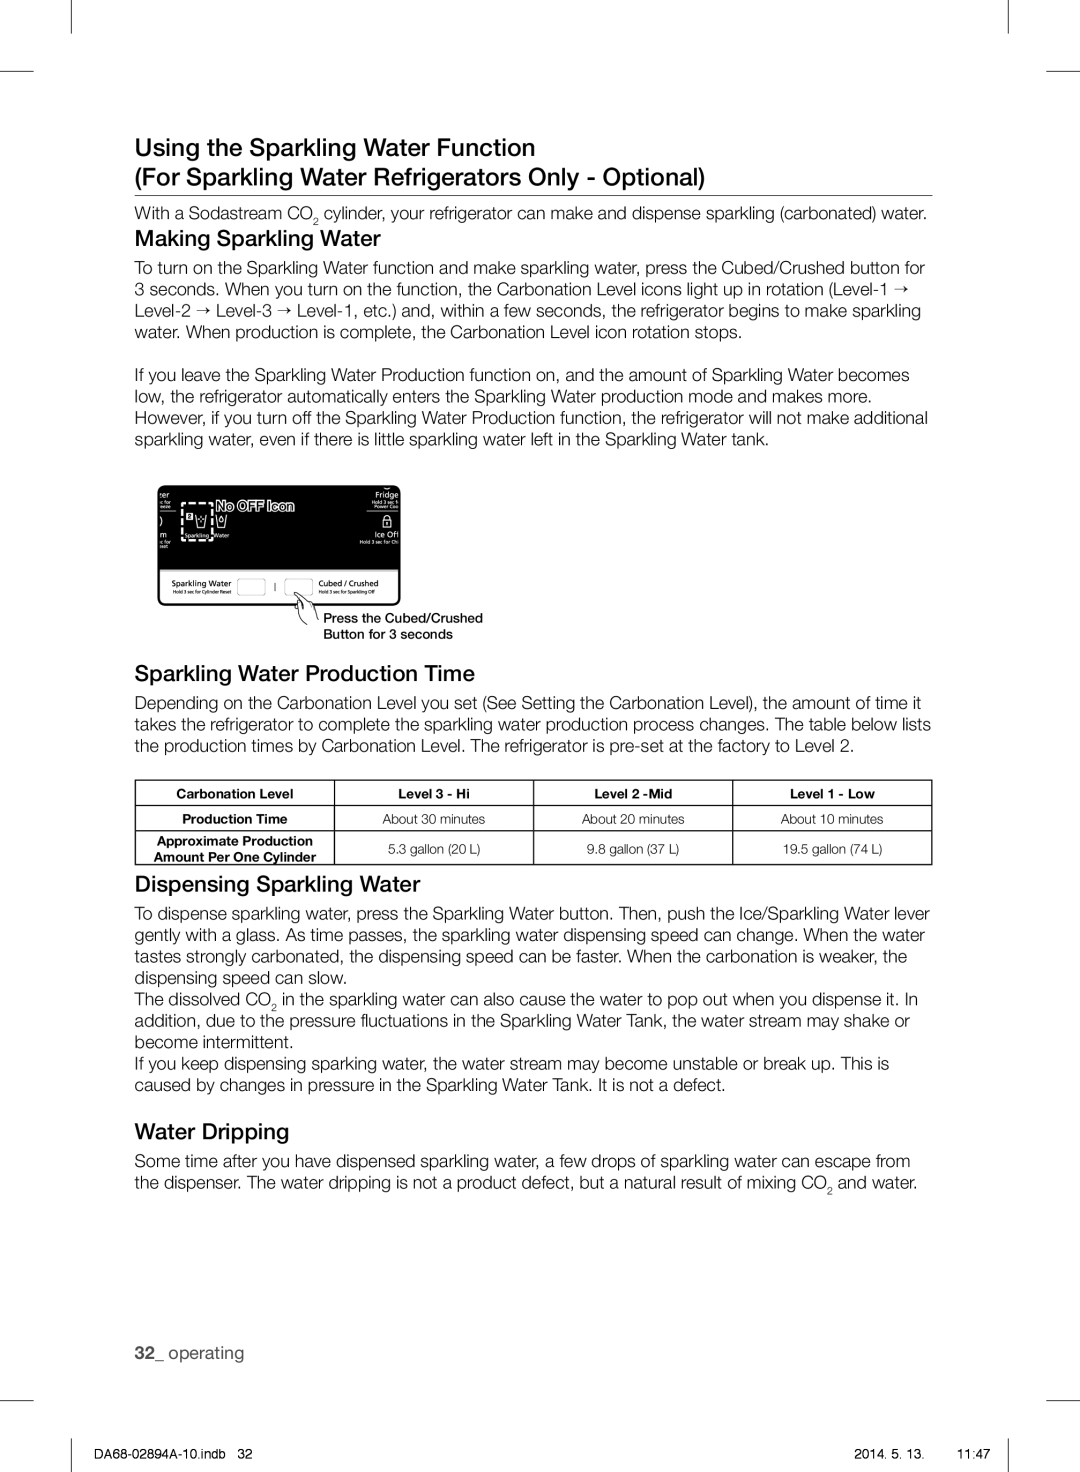 Samsung RF31FMESBSR user manual Using the Sparkling Water Function, Making Sparkling Water, Sparkling Water Production Time 